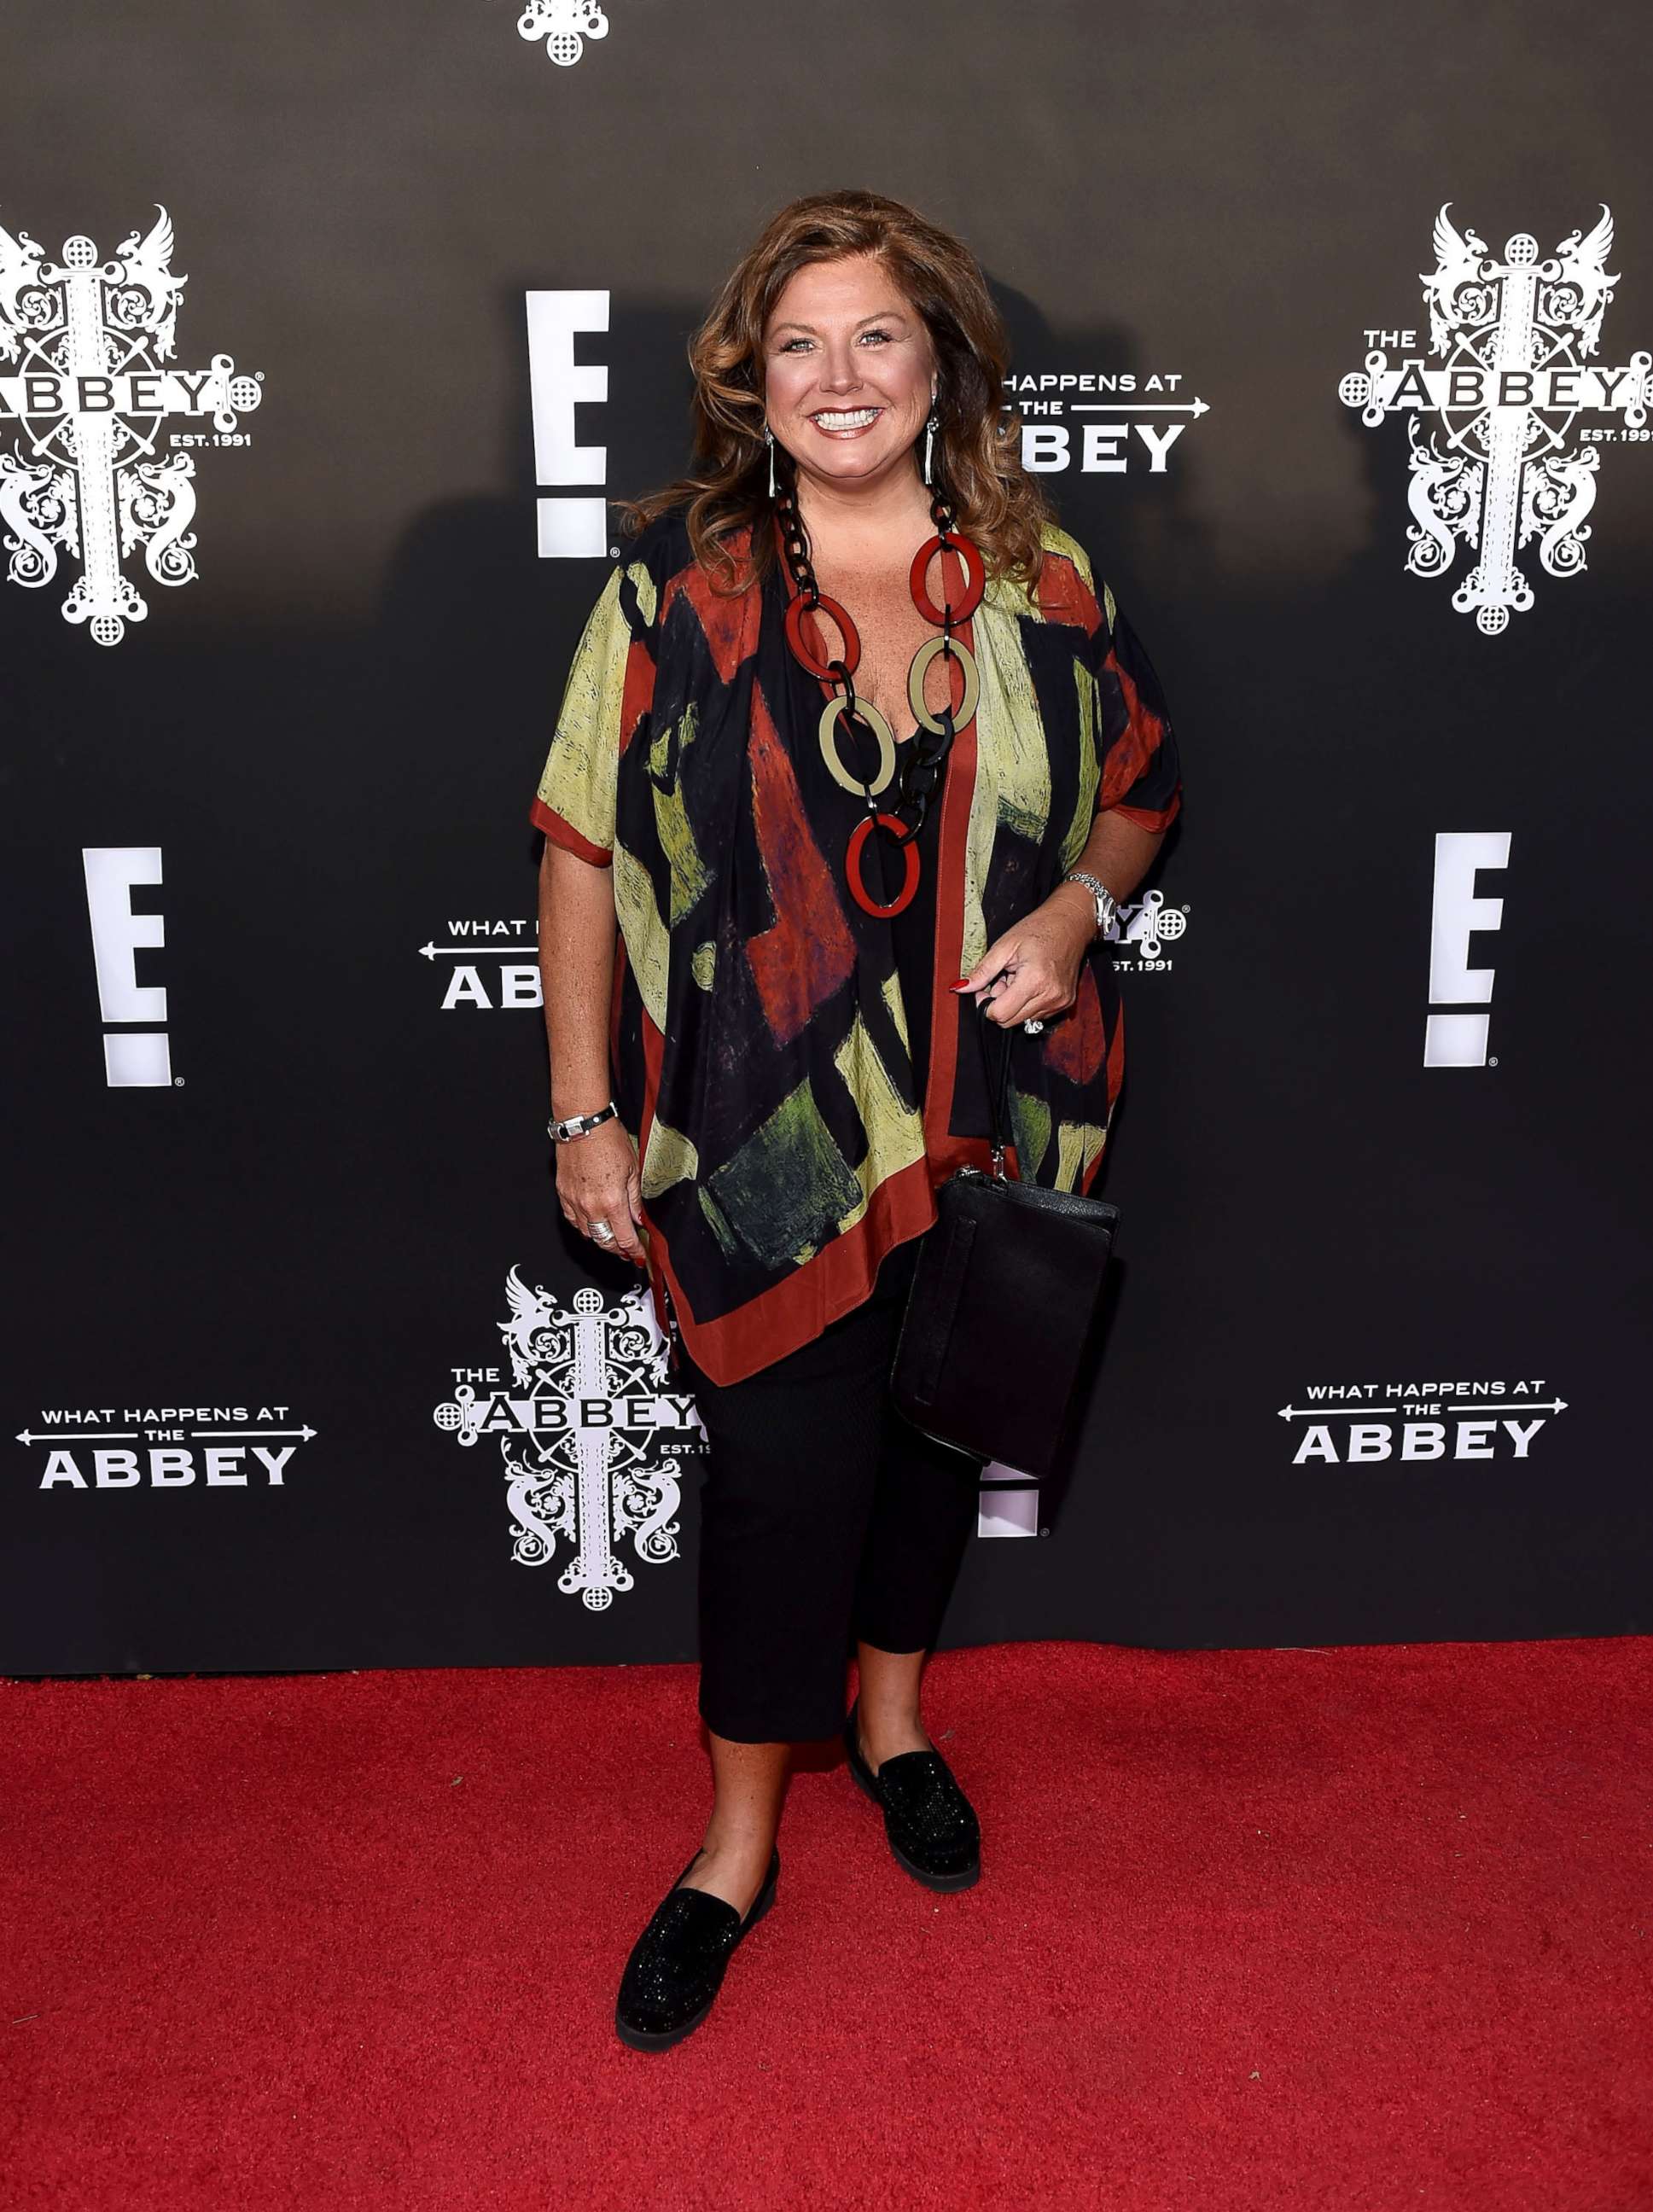 PHOTO: Abby Lee Miller arrives at the Abbey, May 14, 2017, in West Hollywood, California.